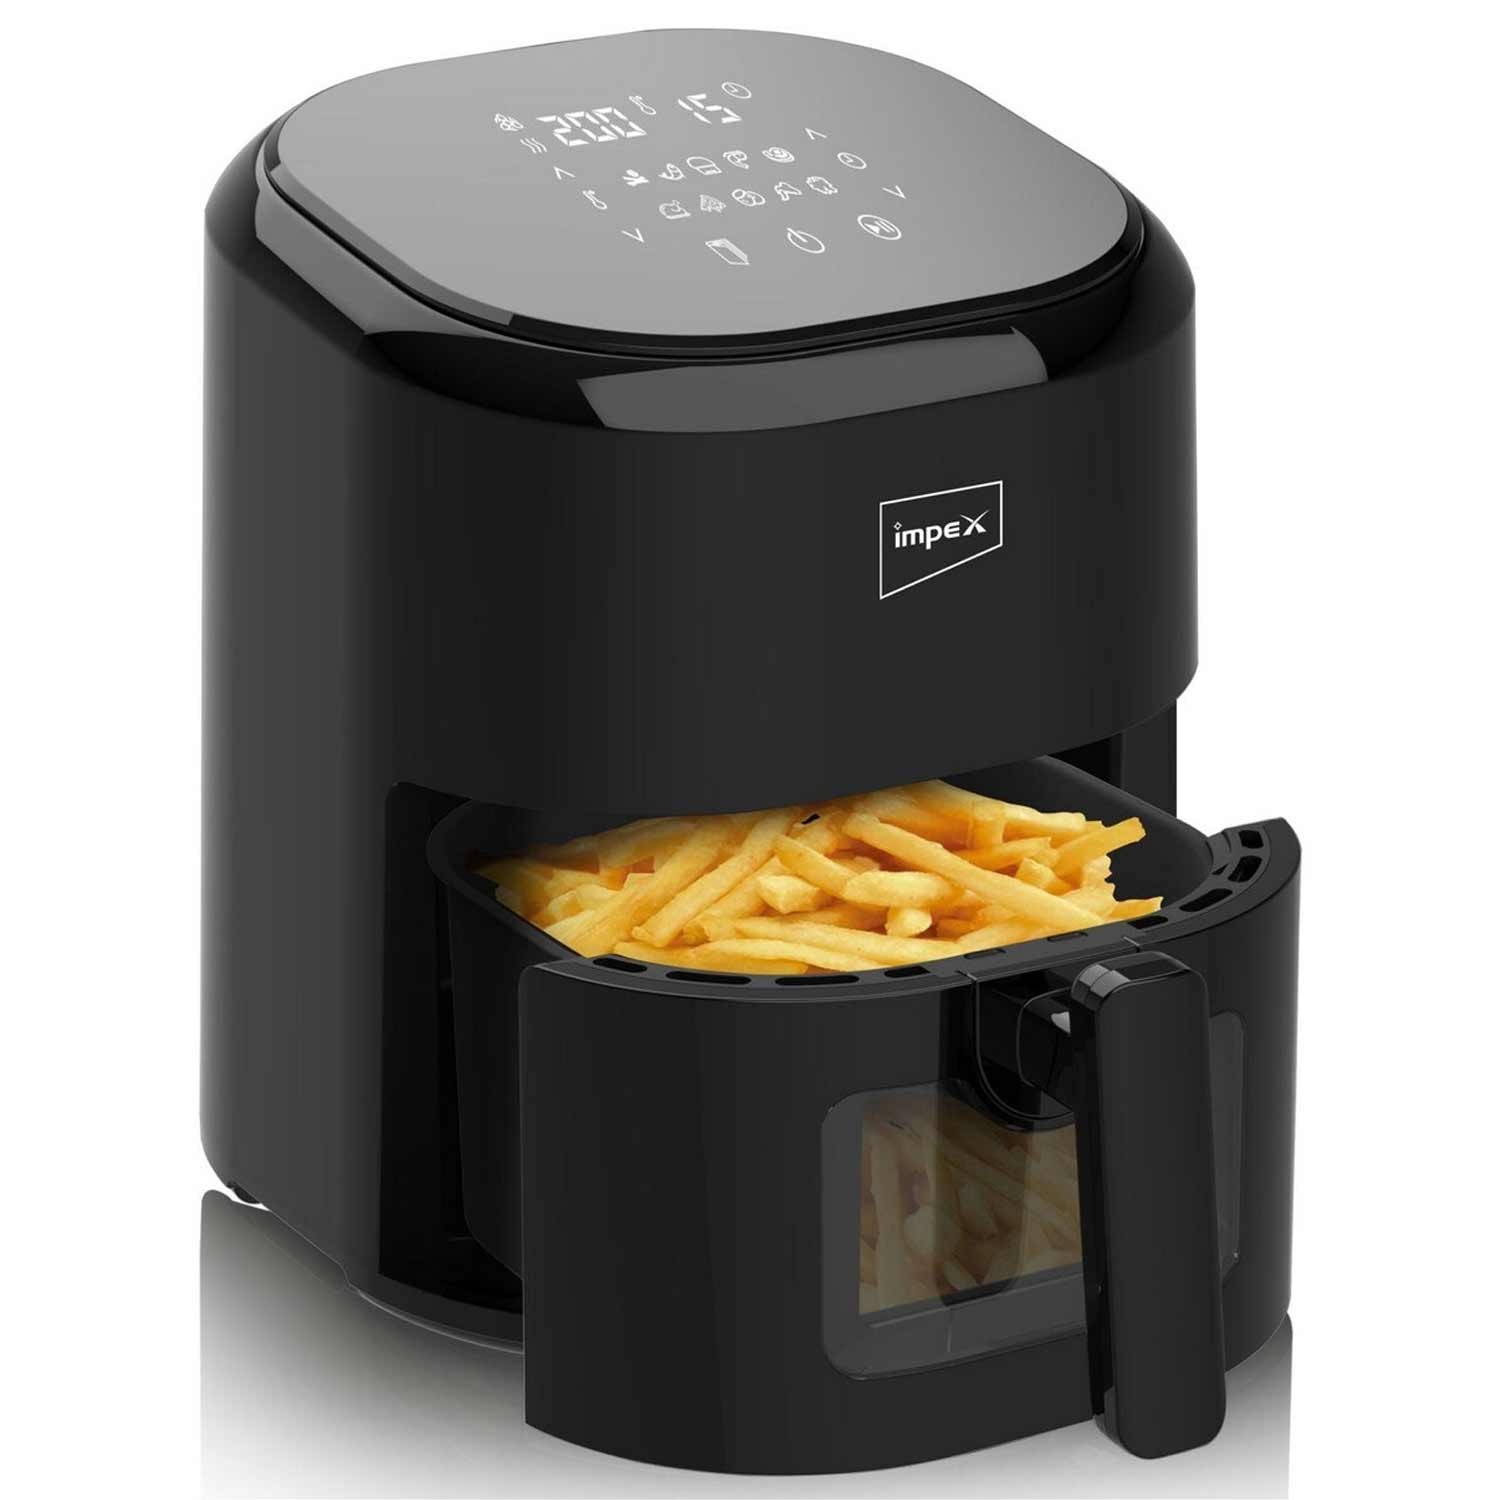 Impex Digital Air Fryer 4.5 L Smart Fry DS45, Transparent Window 1200 W, 80% Less Oil, Instant Electric Air Fryer, Auto Cut Off, Fry, Grill, Roast, Steam, and Bake 2 Years Warranty